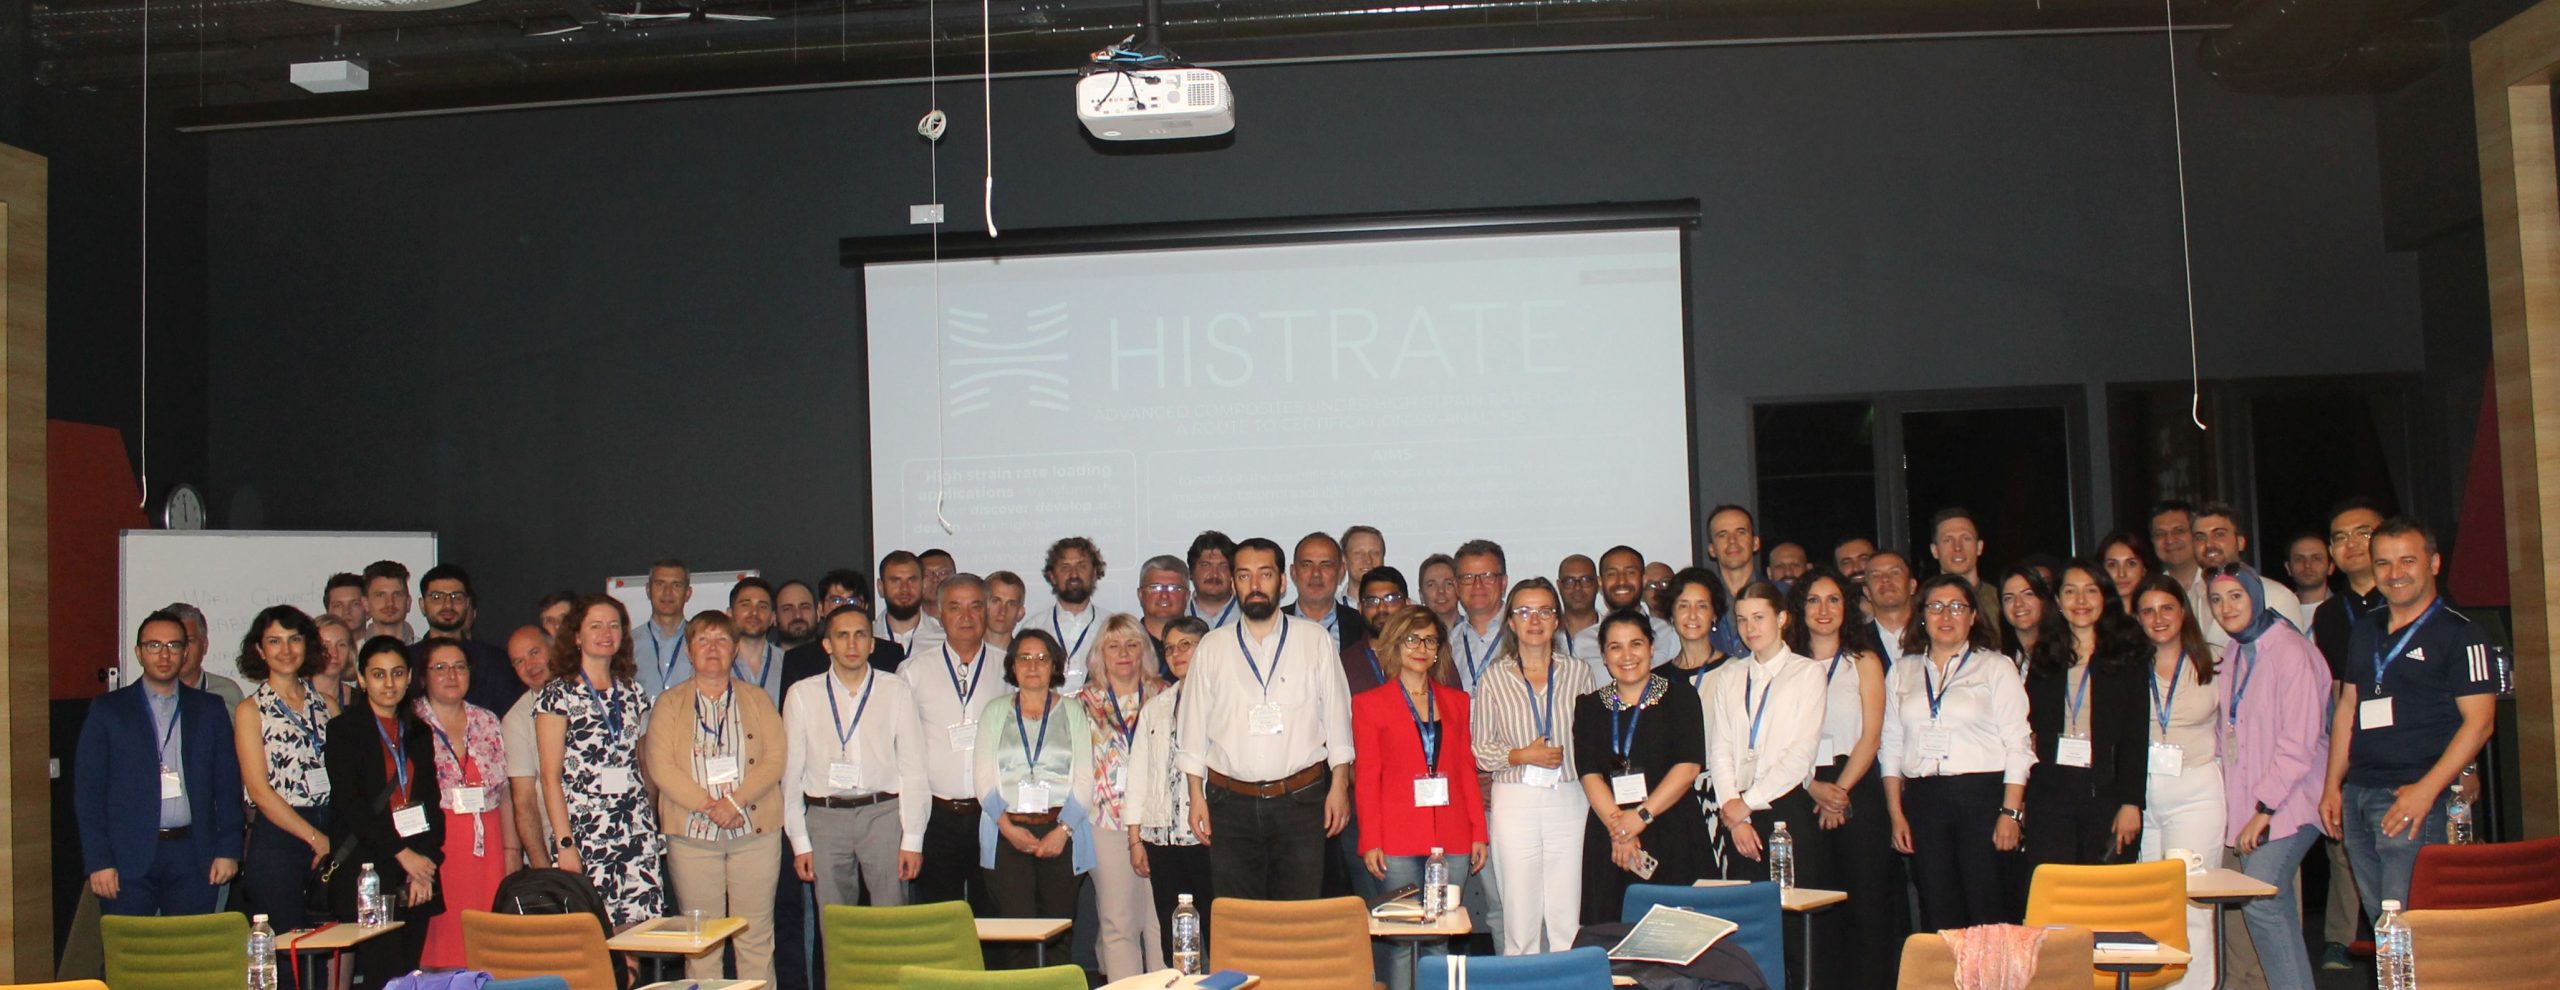 First Histrate conference attendees standing in from of a large screen at the conference venue in Turkey.